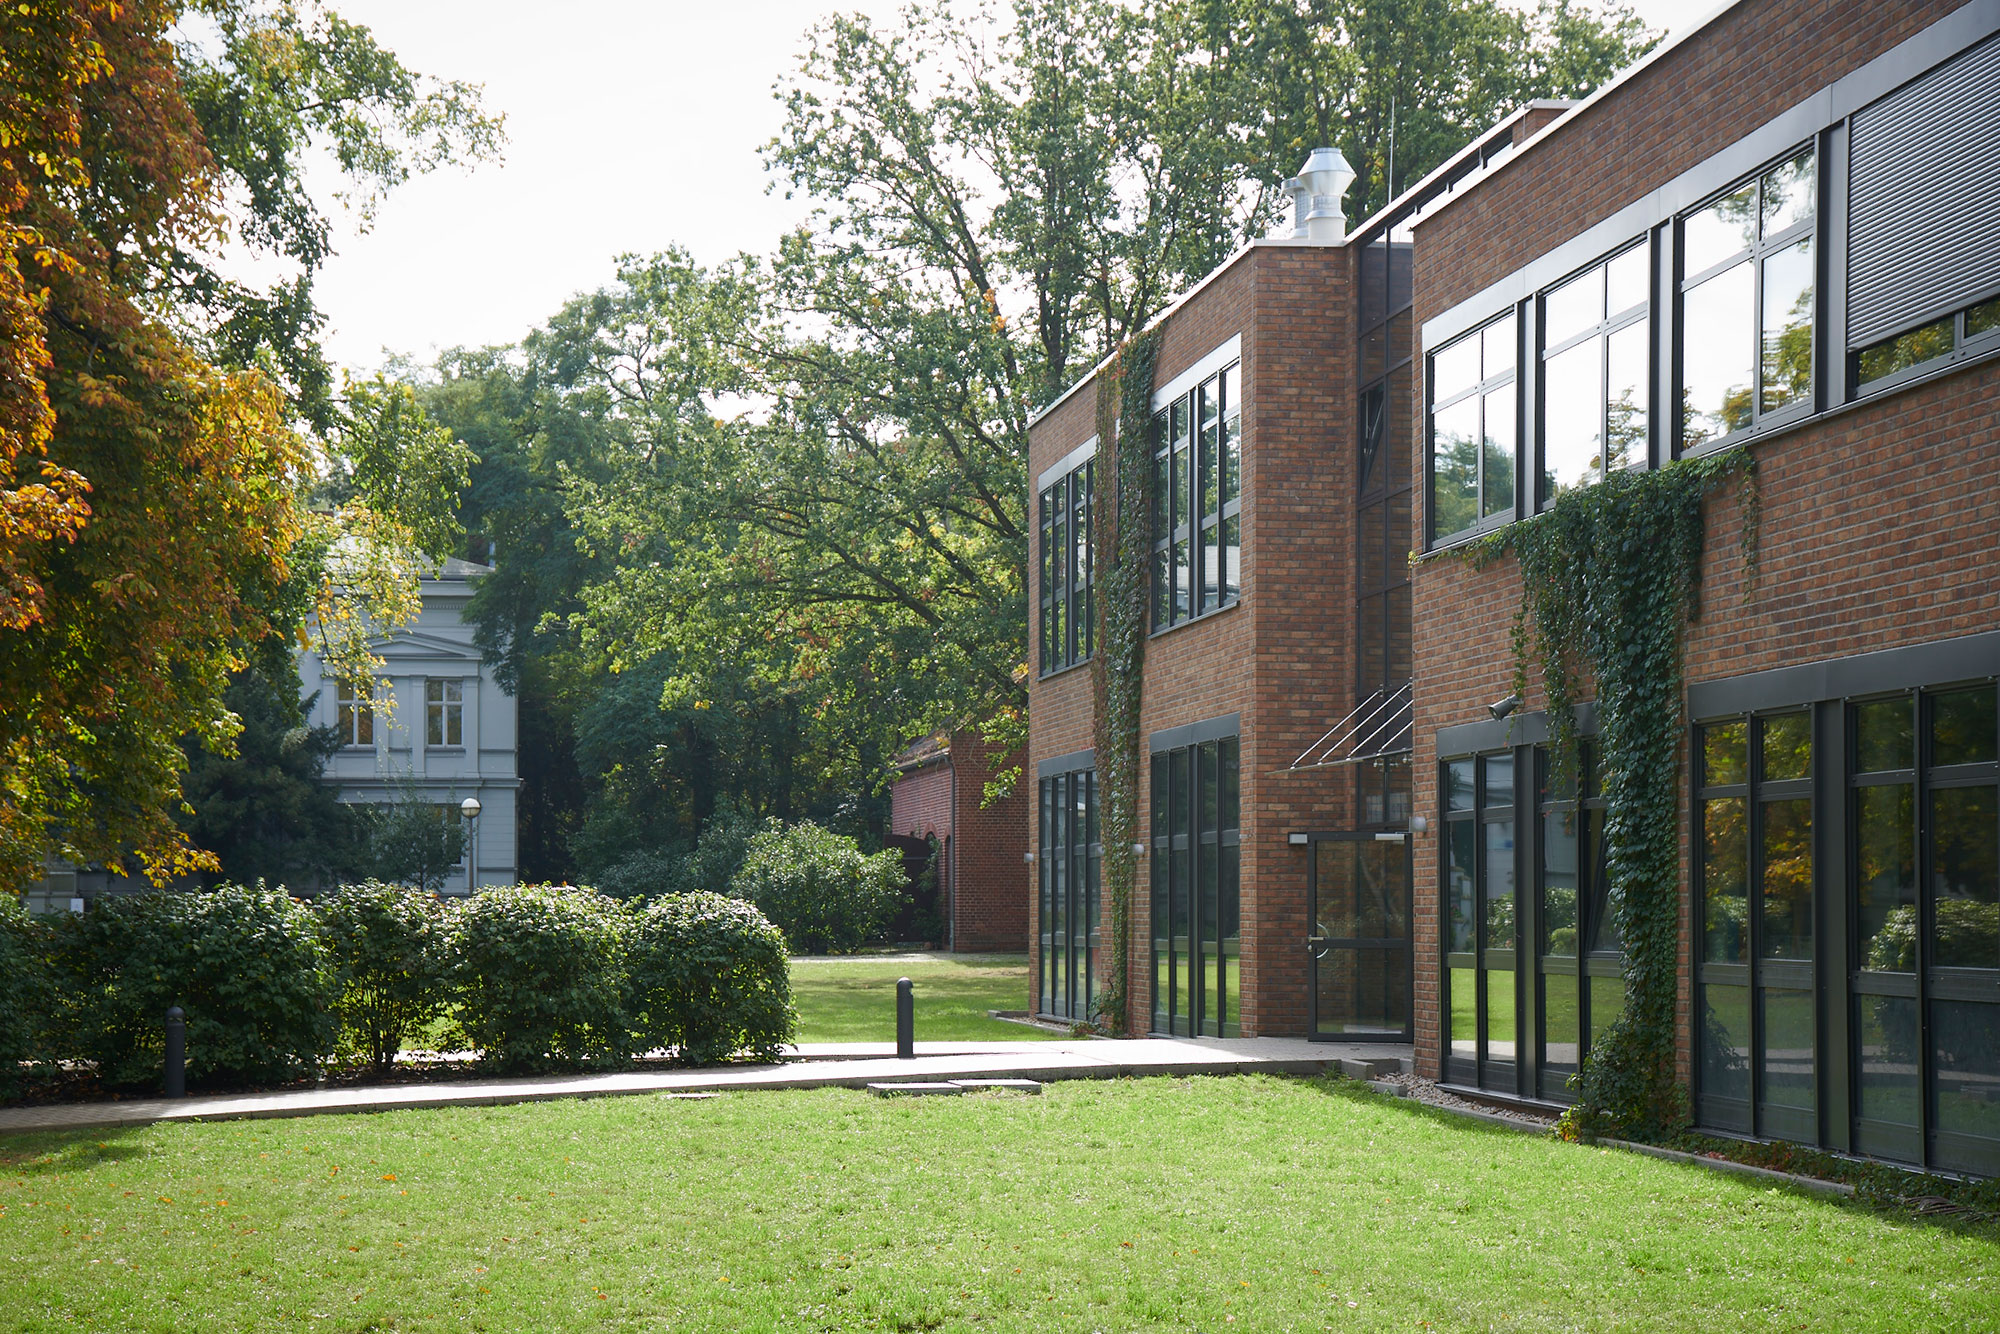 In the right half of the picture, a school building can be seen, with clinker bricks and large window fronts. Surrounded by lawn, trees and bushes. In the background, hidden behind trees, another school building can be seen.